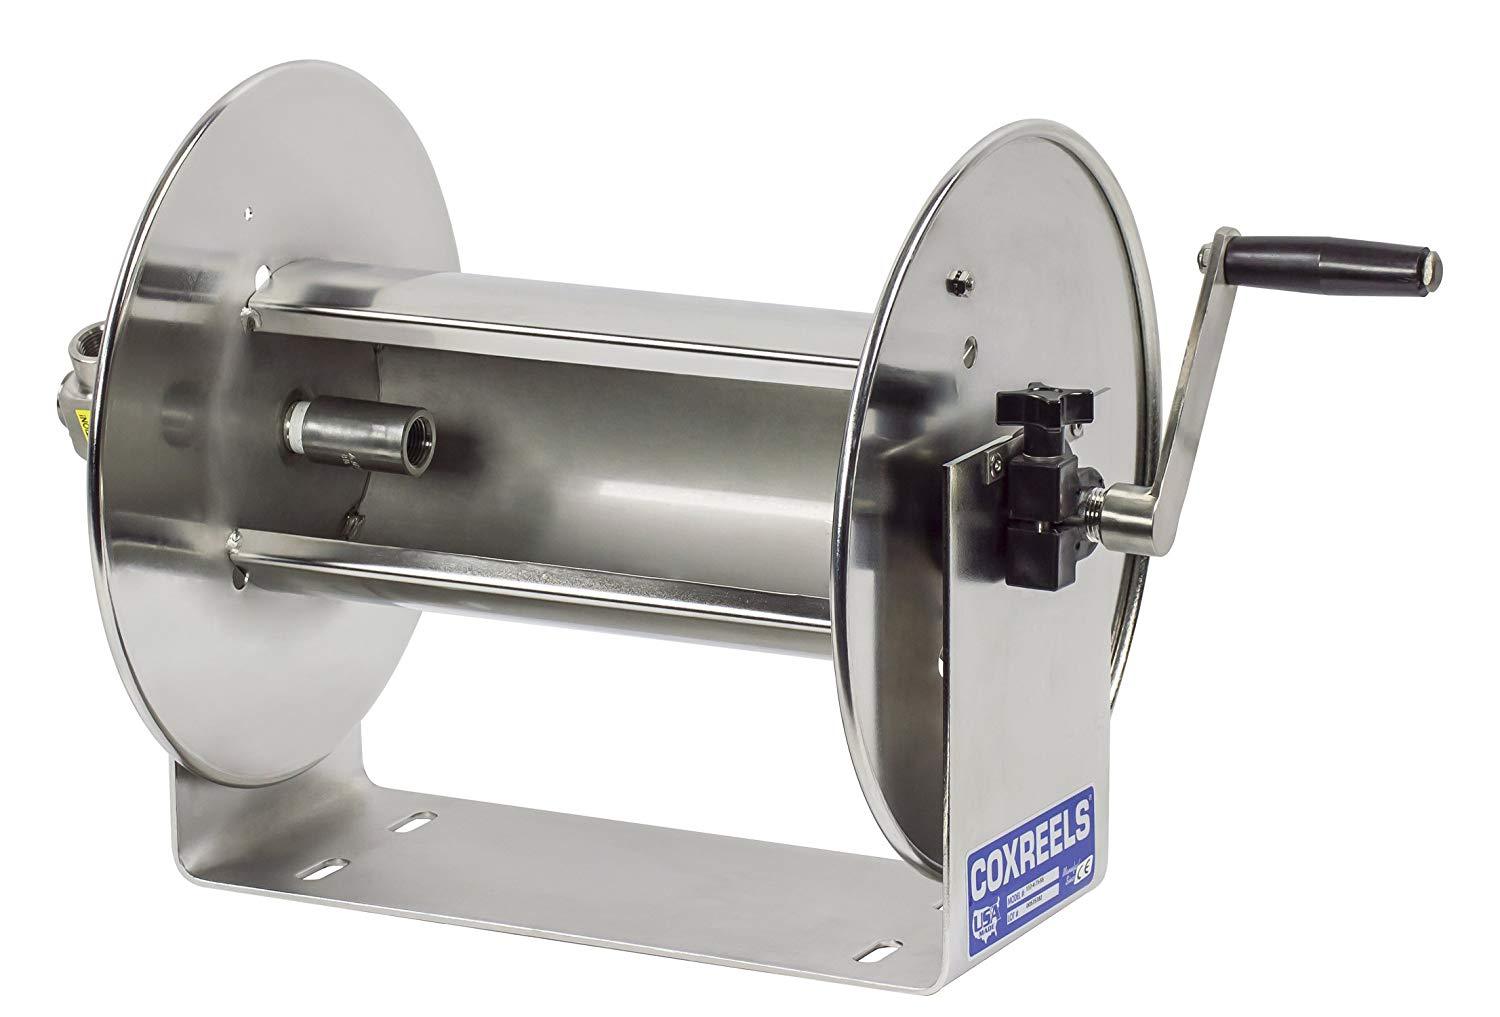 117-4-225-SS : Coxreels 117-4-225-SS Stainless Steel Hand Crank Hose Reel, 1/2" ID, 225' capacity, NO HOSE, 4000psi